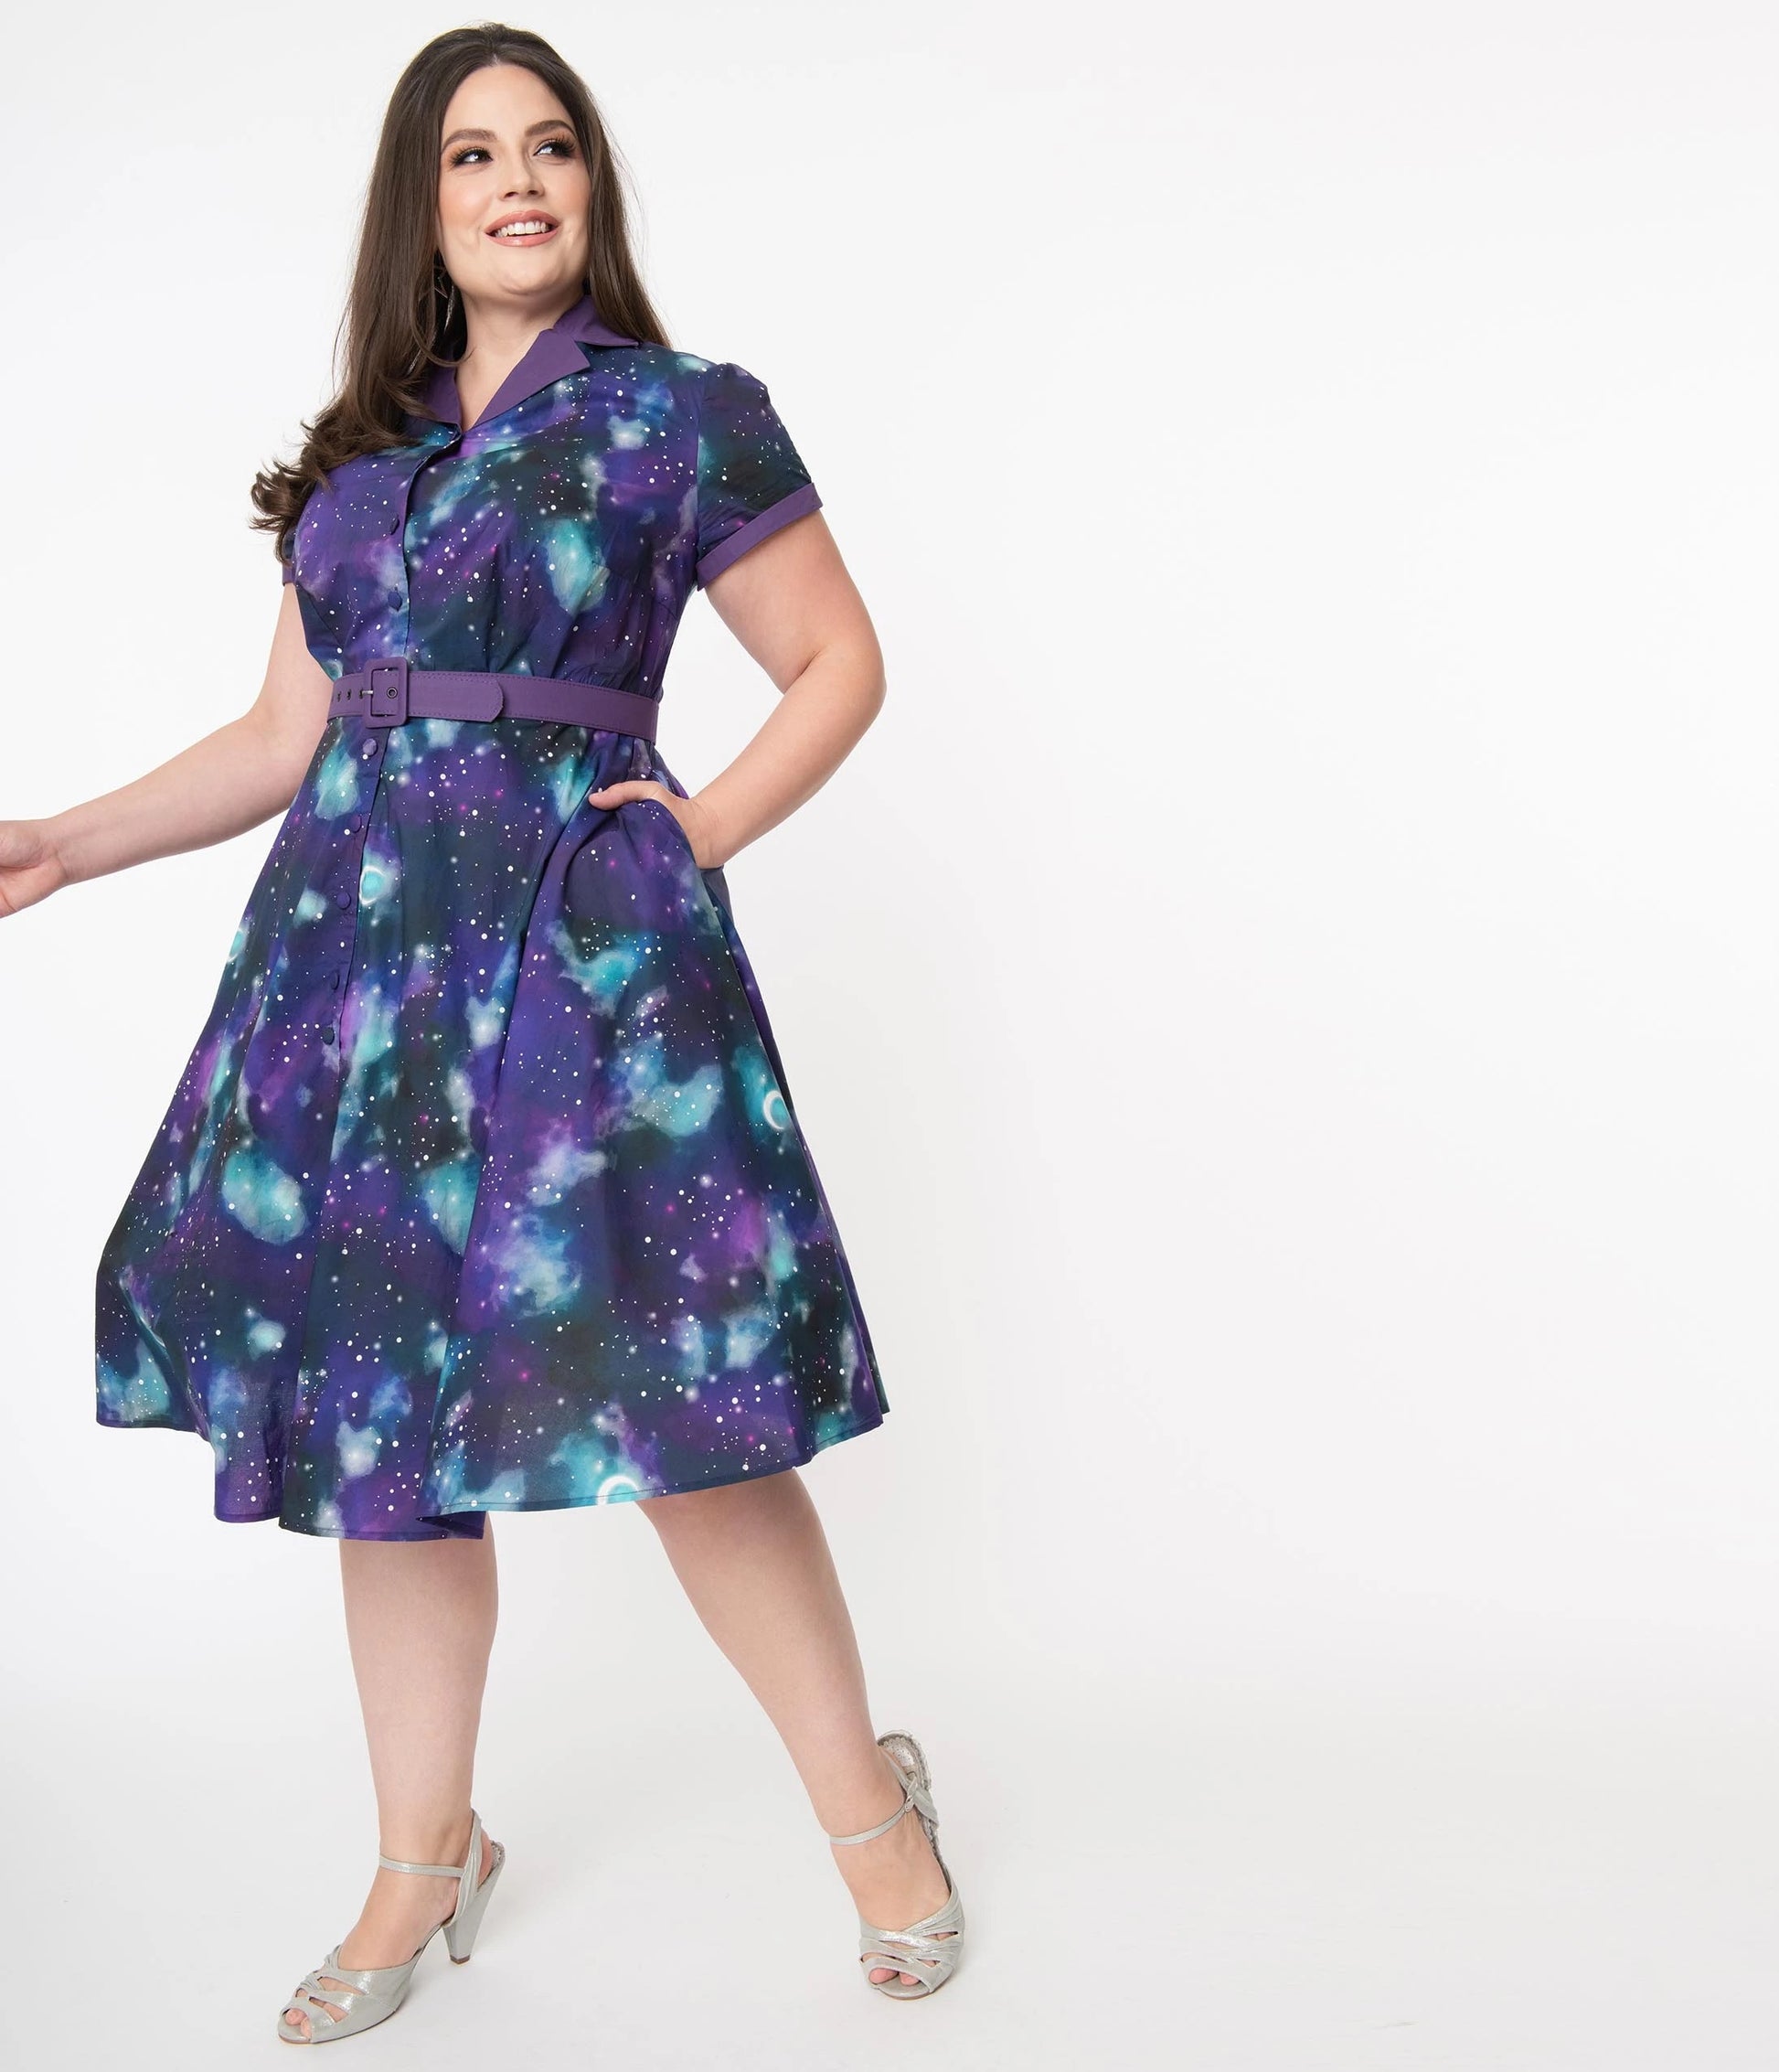 A brown haired smiling girl wearing a purple space print dress standing looking over her shoulder in front of a white background